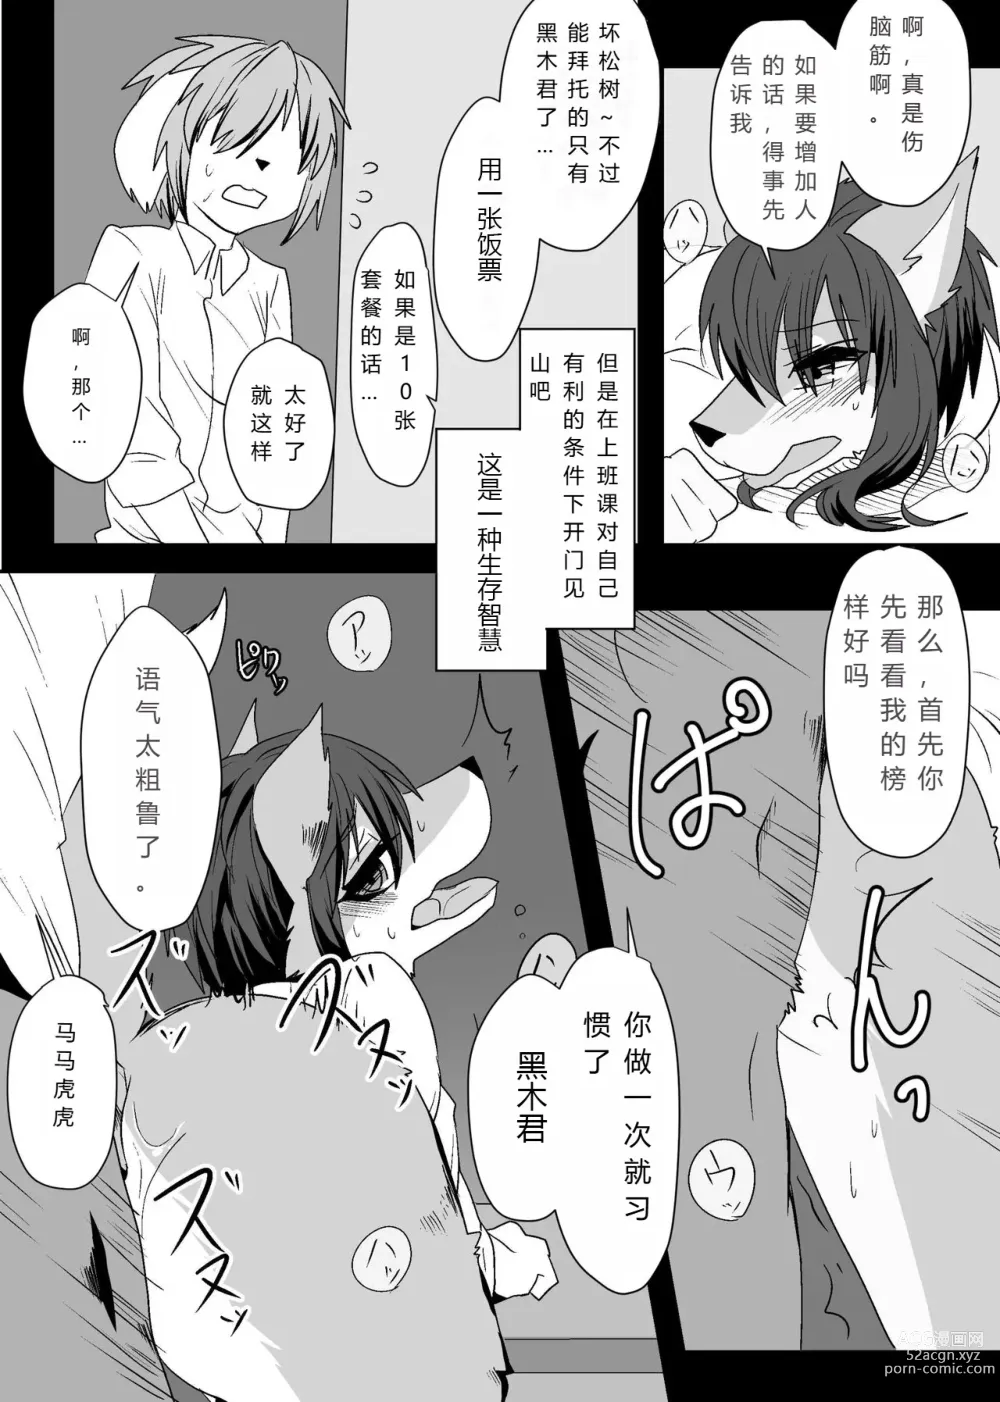 Page 5 of doujinshi 我们要上班吗？